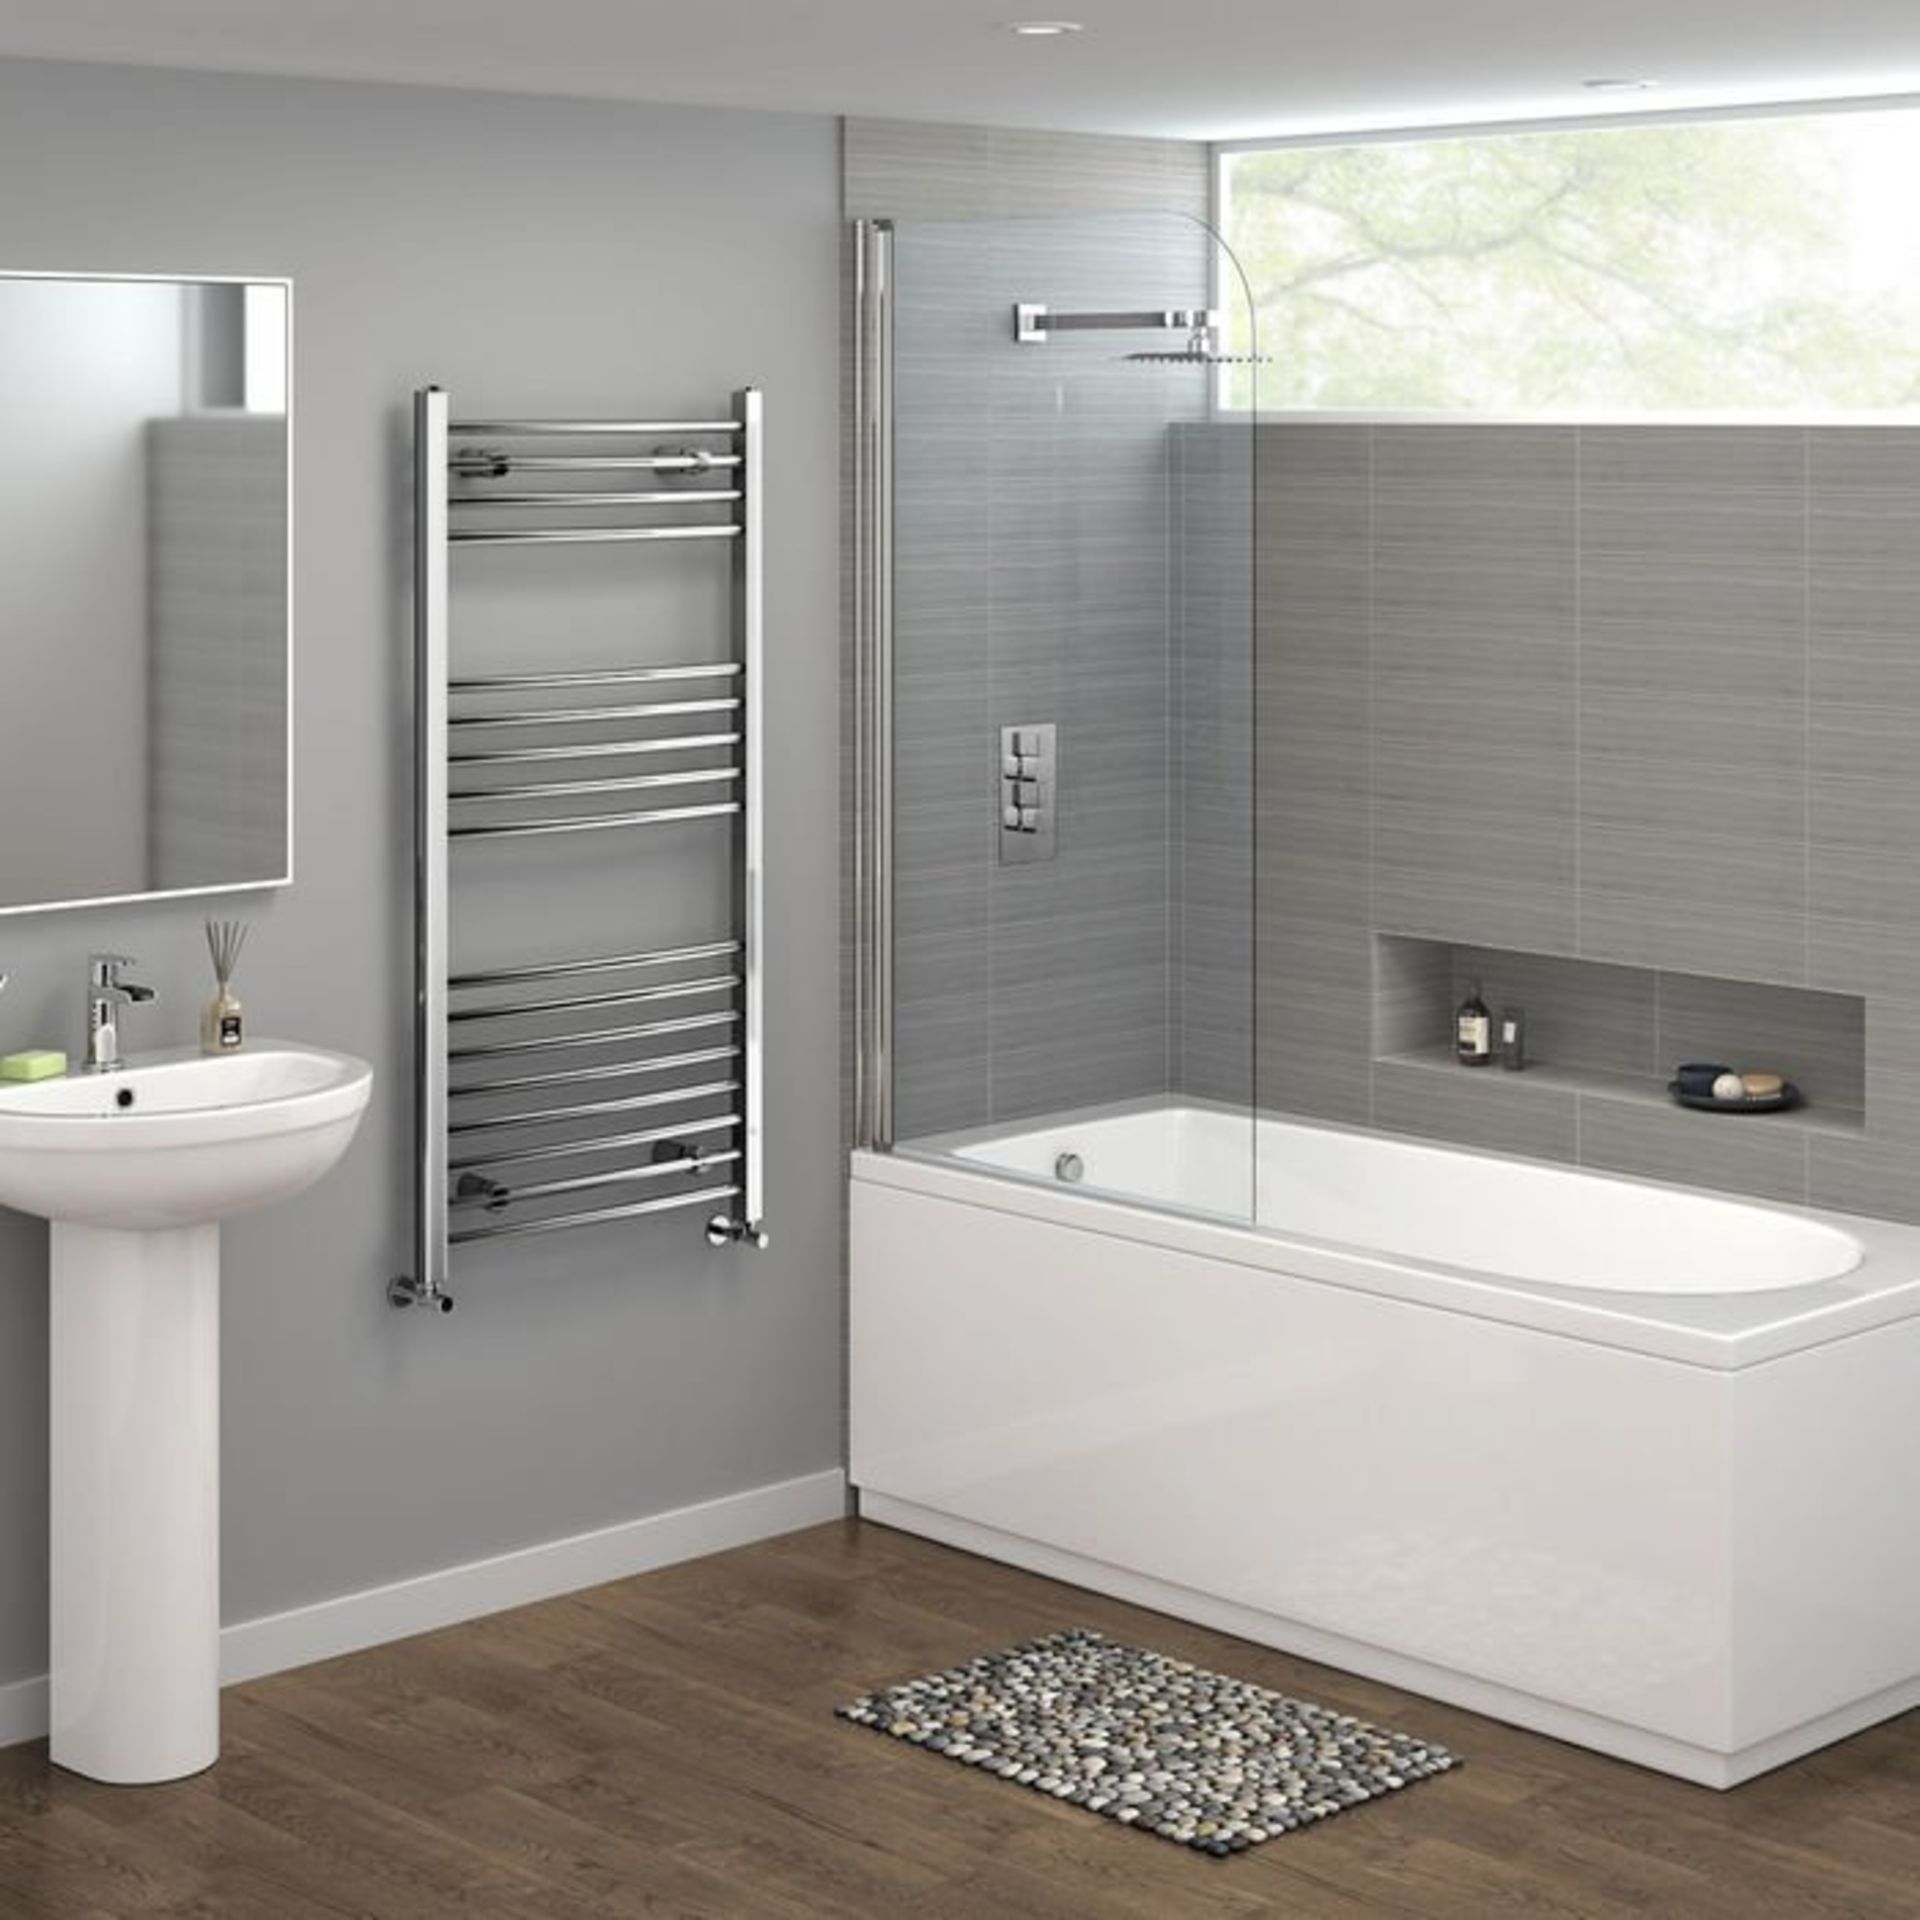 (H150) 1200x600mm - 20mm Tubes - Chrome Curved Rail Ladder Towel Radiator. RRP £137.59. Low carbon - Image 2 of 3